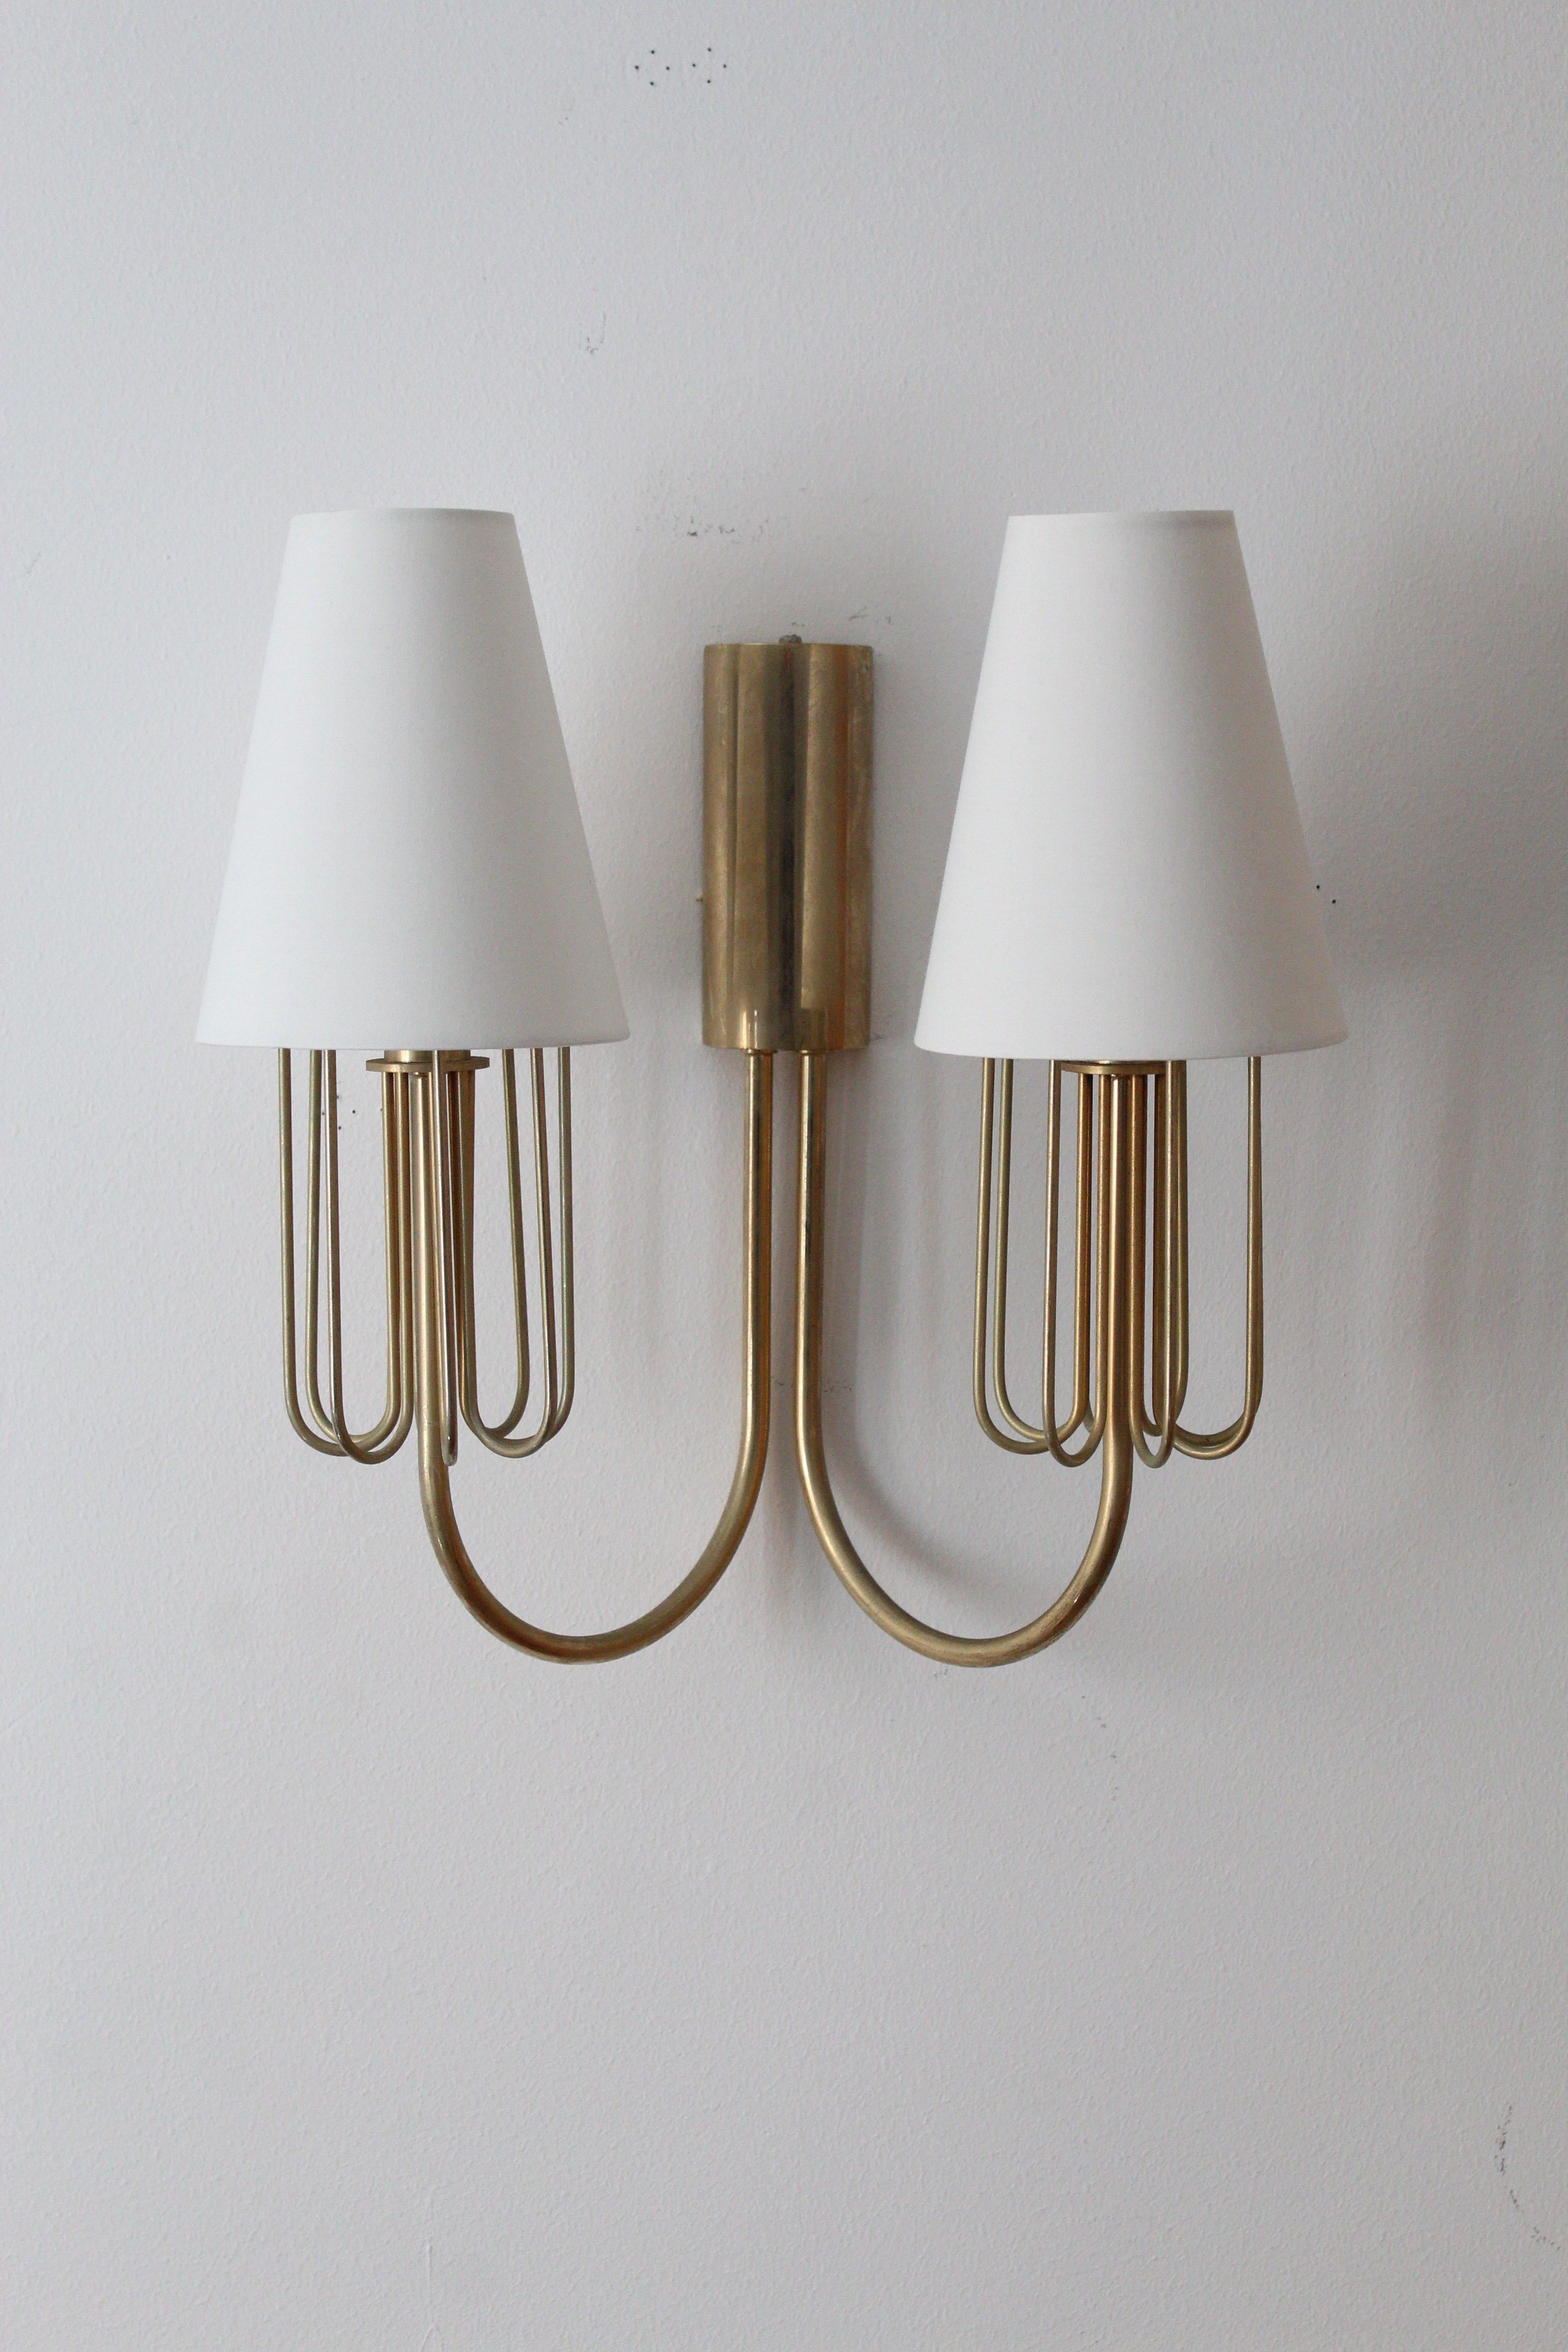 A two armed wall light / sconce. Designed and produced in Sweden, c. 1950s. 

Brand new high-end lampshades.

Other designers of the period include Paavo Tynell, Jean Royère, Hans Bergström, Hans-Agne Jakobsson, and Kaare Klint.

    